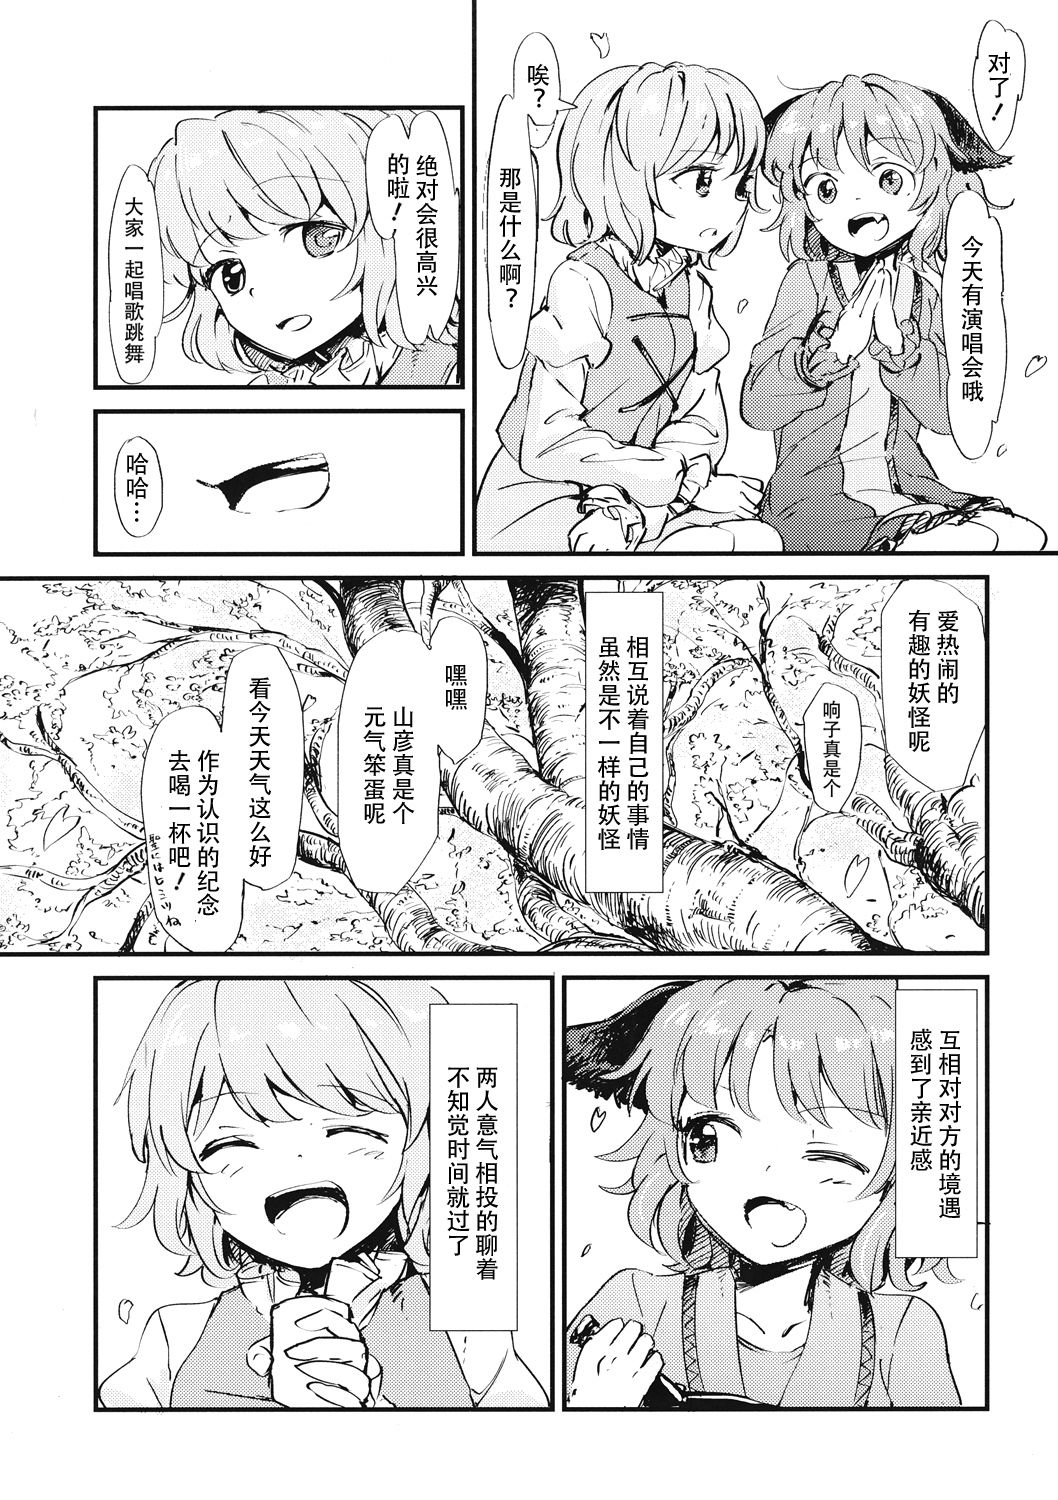 (C86) [Satei (s73d)] Kasa no miren (Touhou Project) [Chinese] [CE家族社] (C86) [砂亭 (s73d)] 傘の未練 (東方Project) [中文翻譯]